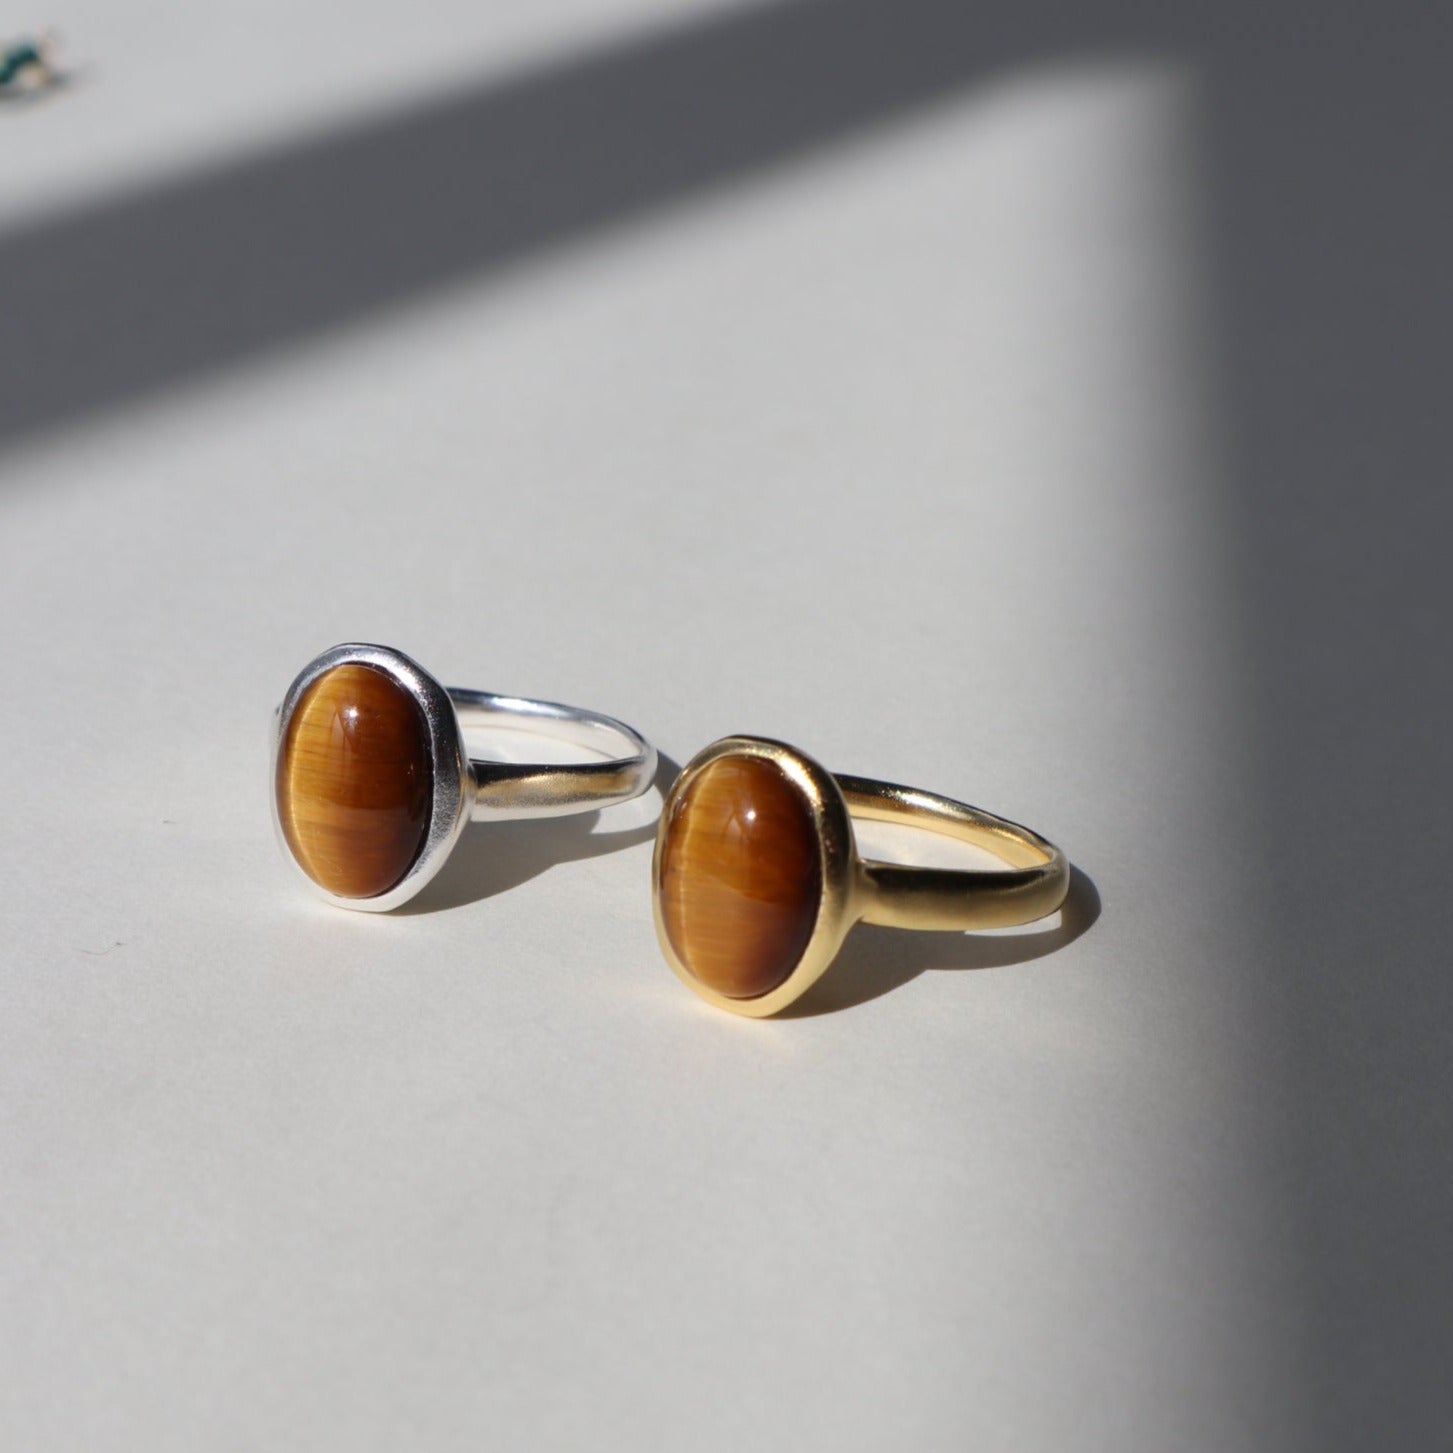 The 'Tiger's Eye' Oval Ring